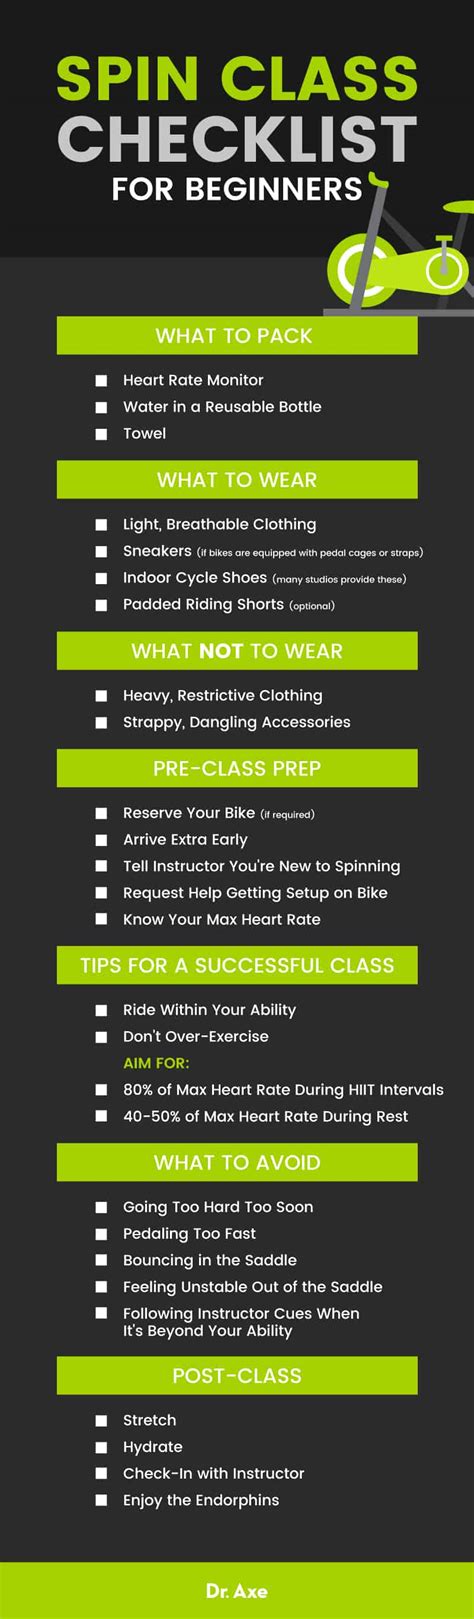 spin class a checklist for beginners benefits of indoor cycling dr axe